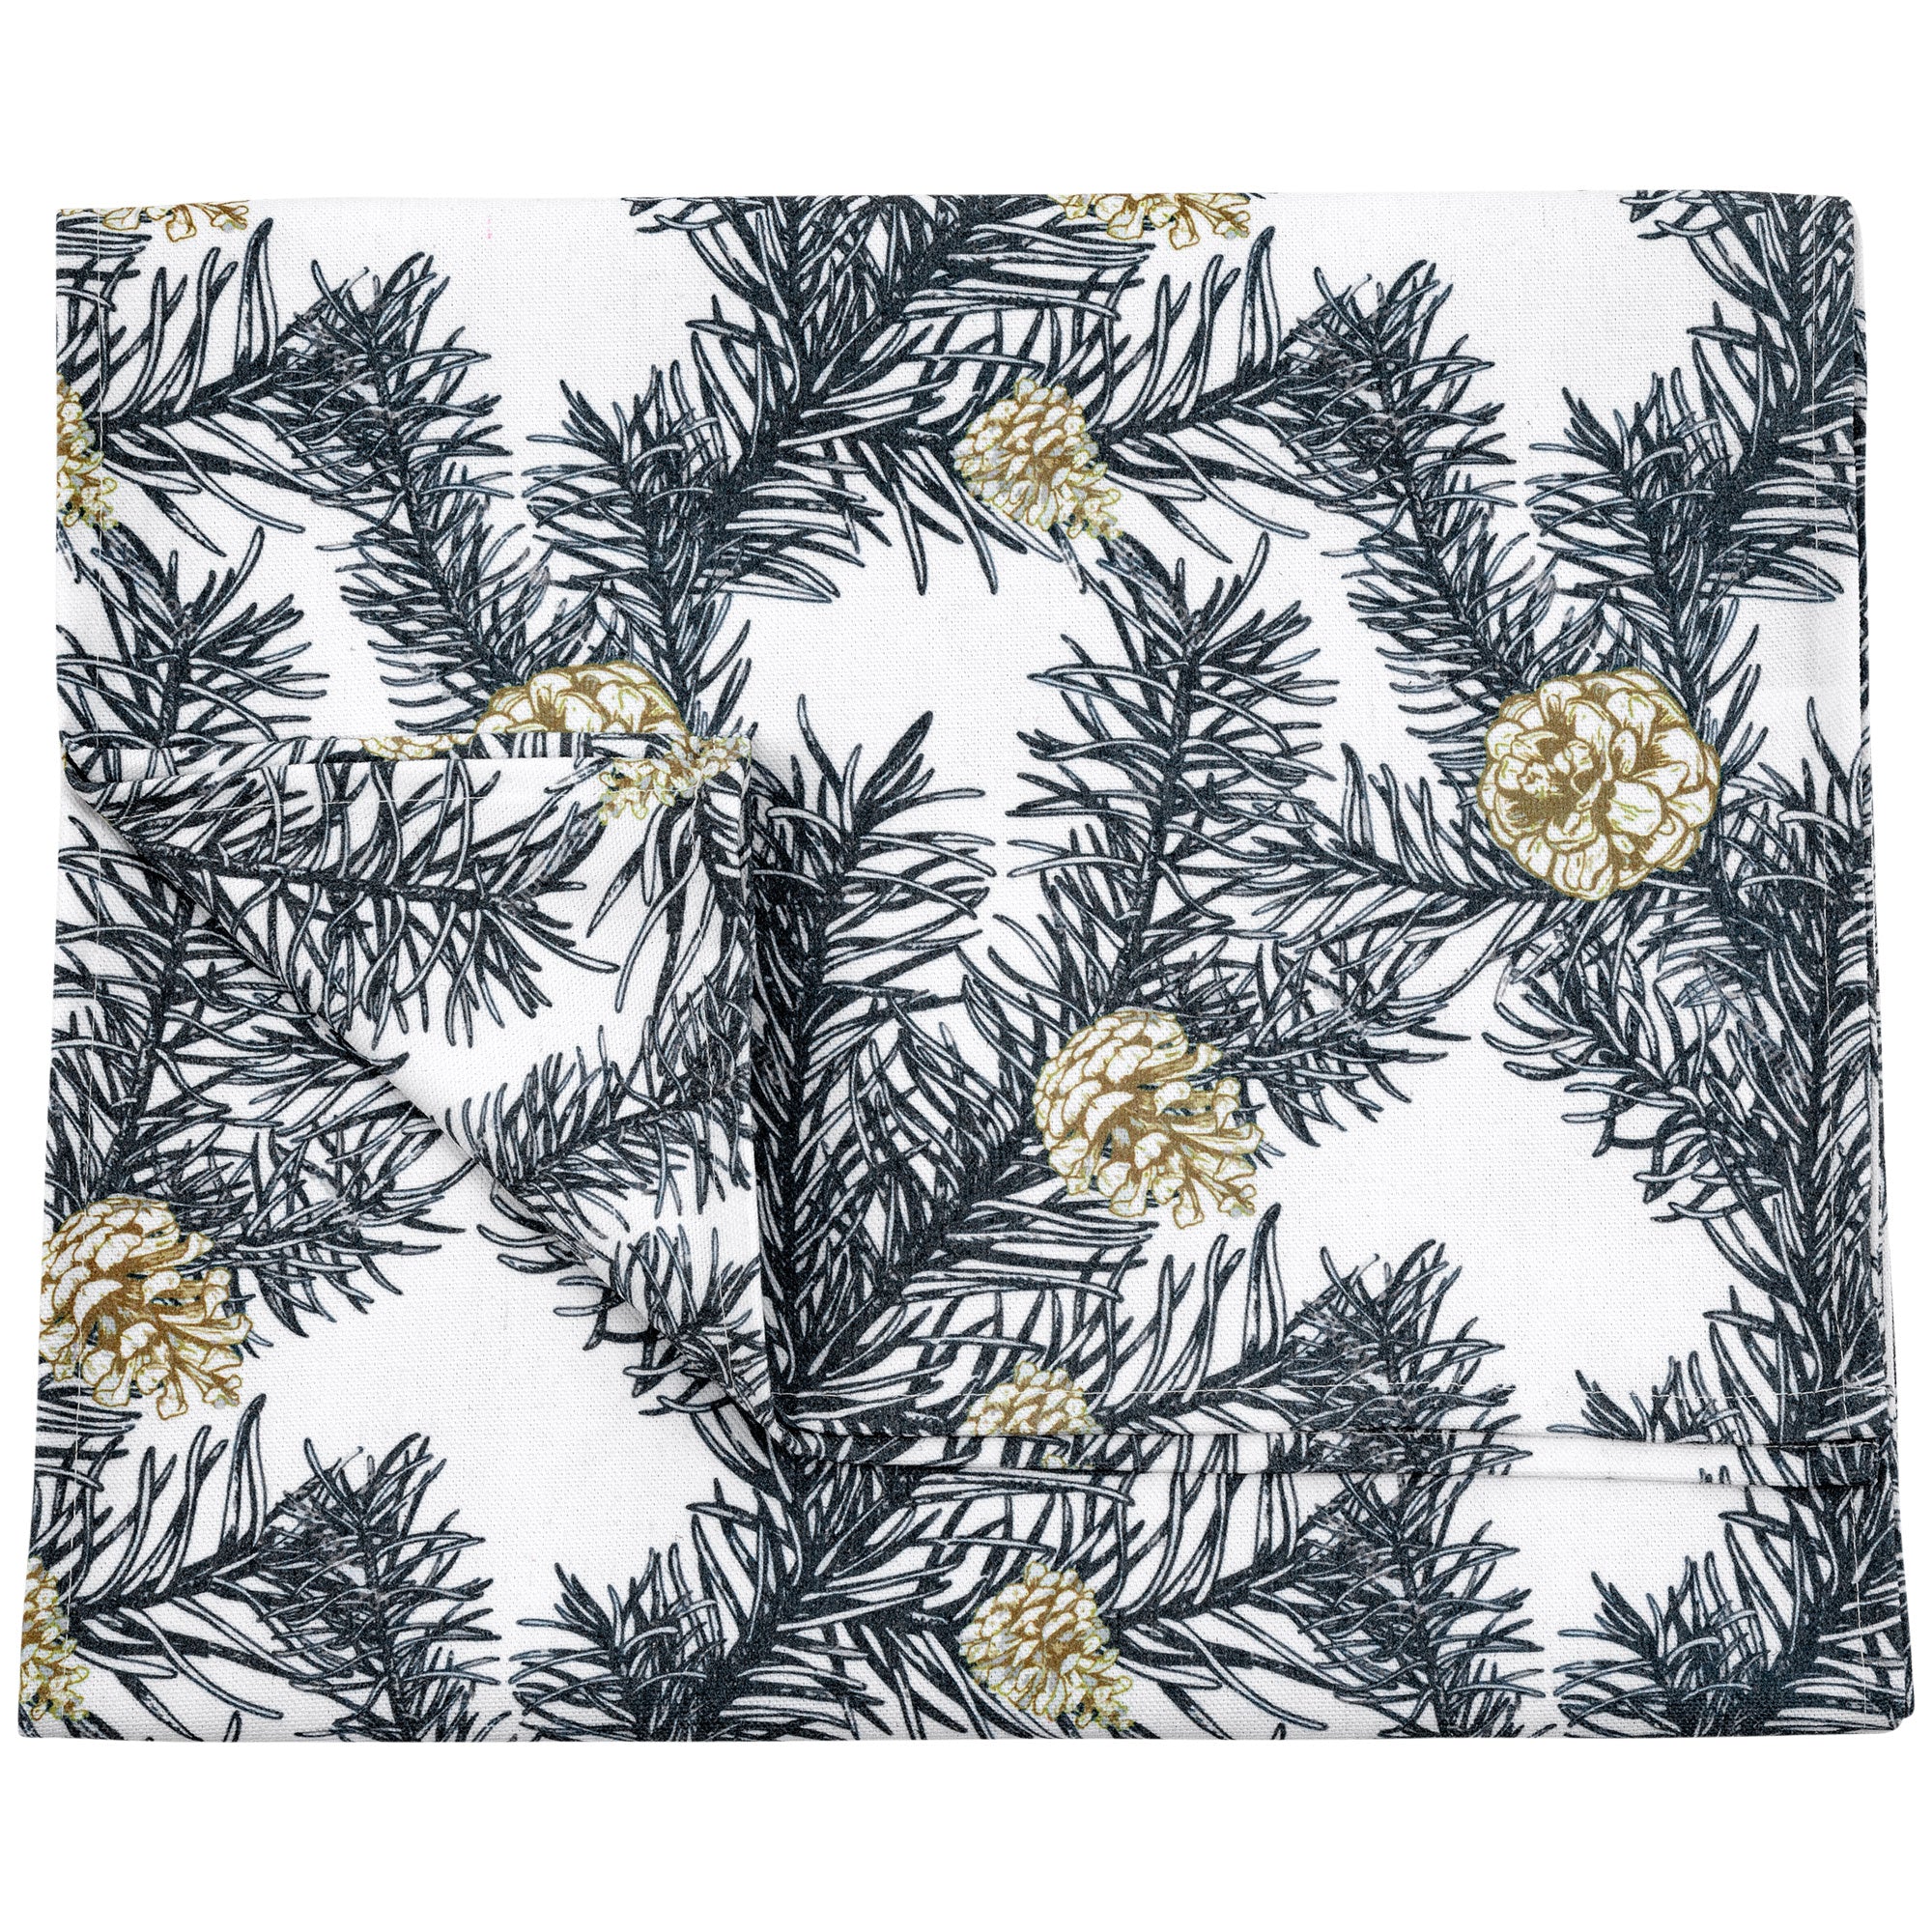 Pine Cones & Spruce Table Linens - Table Runner